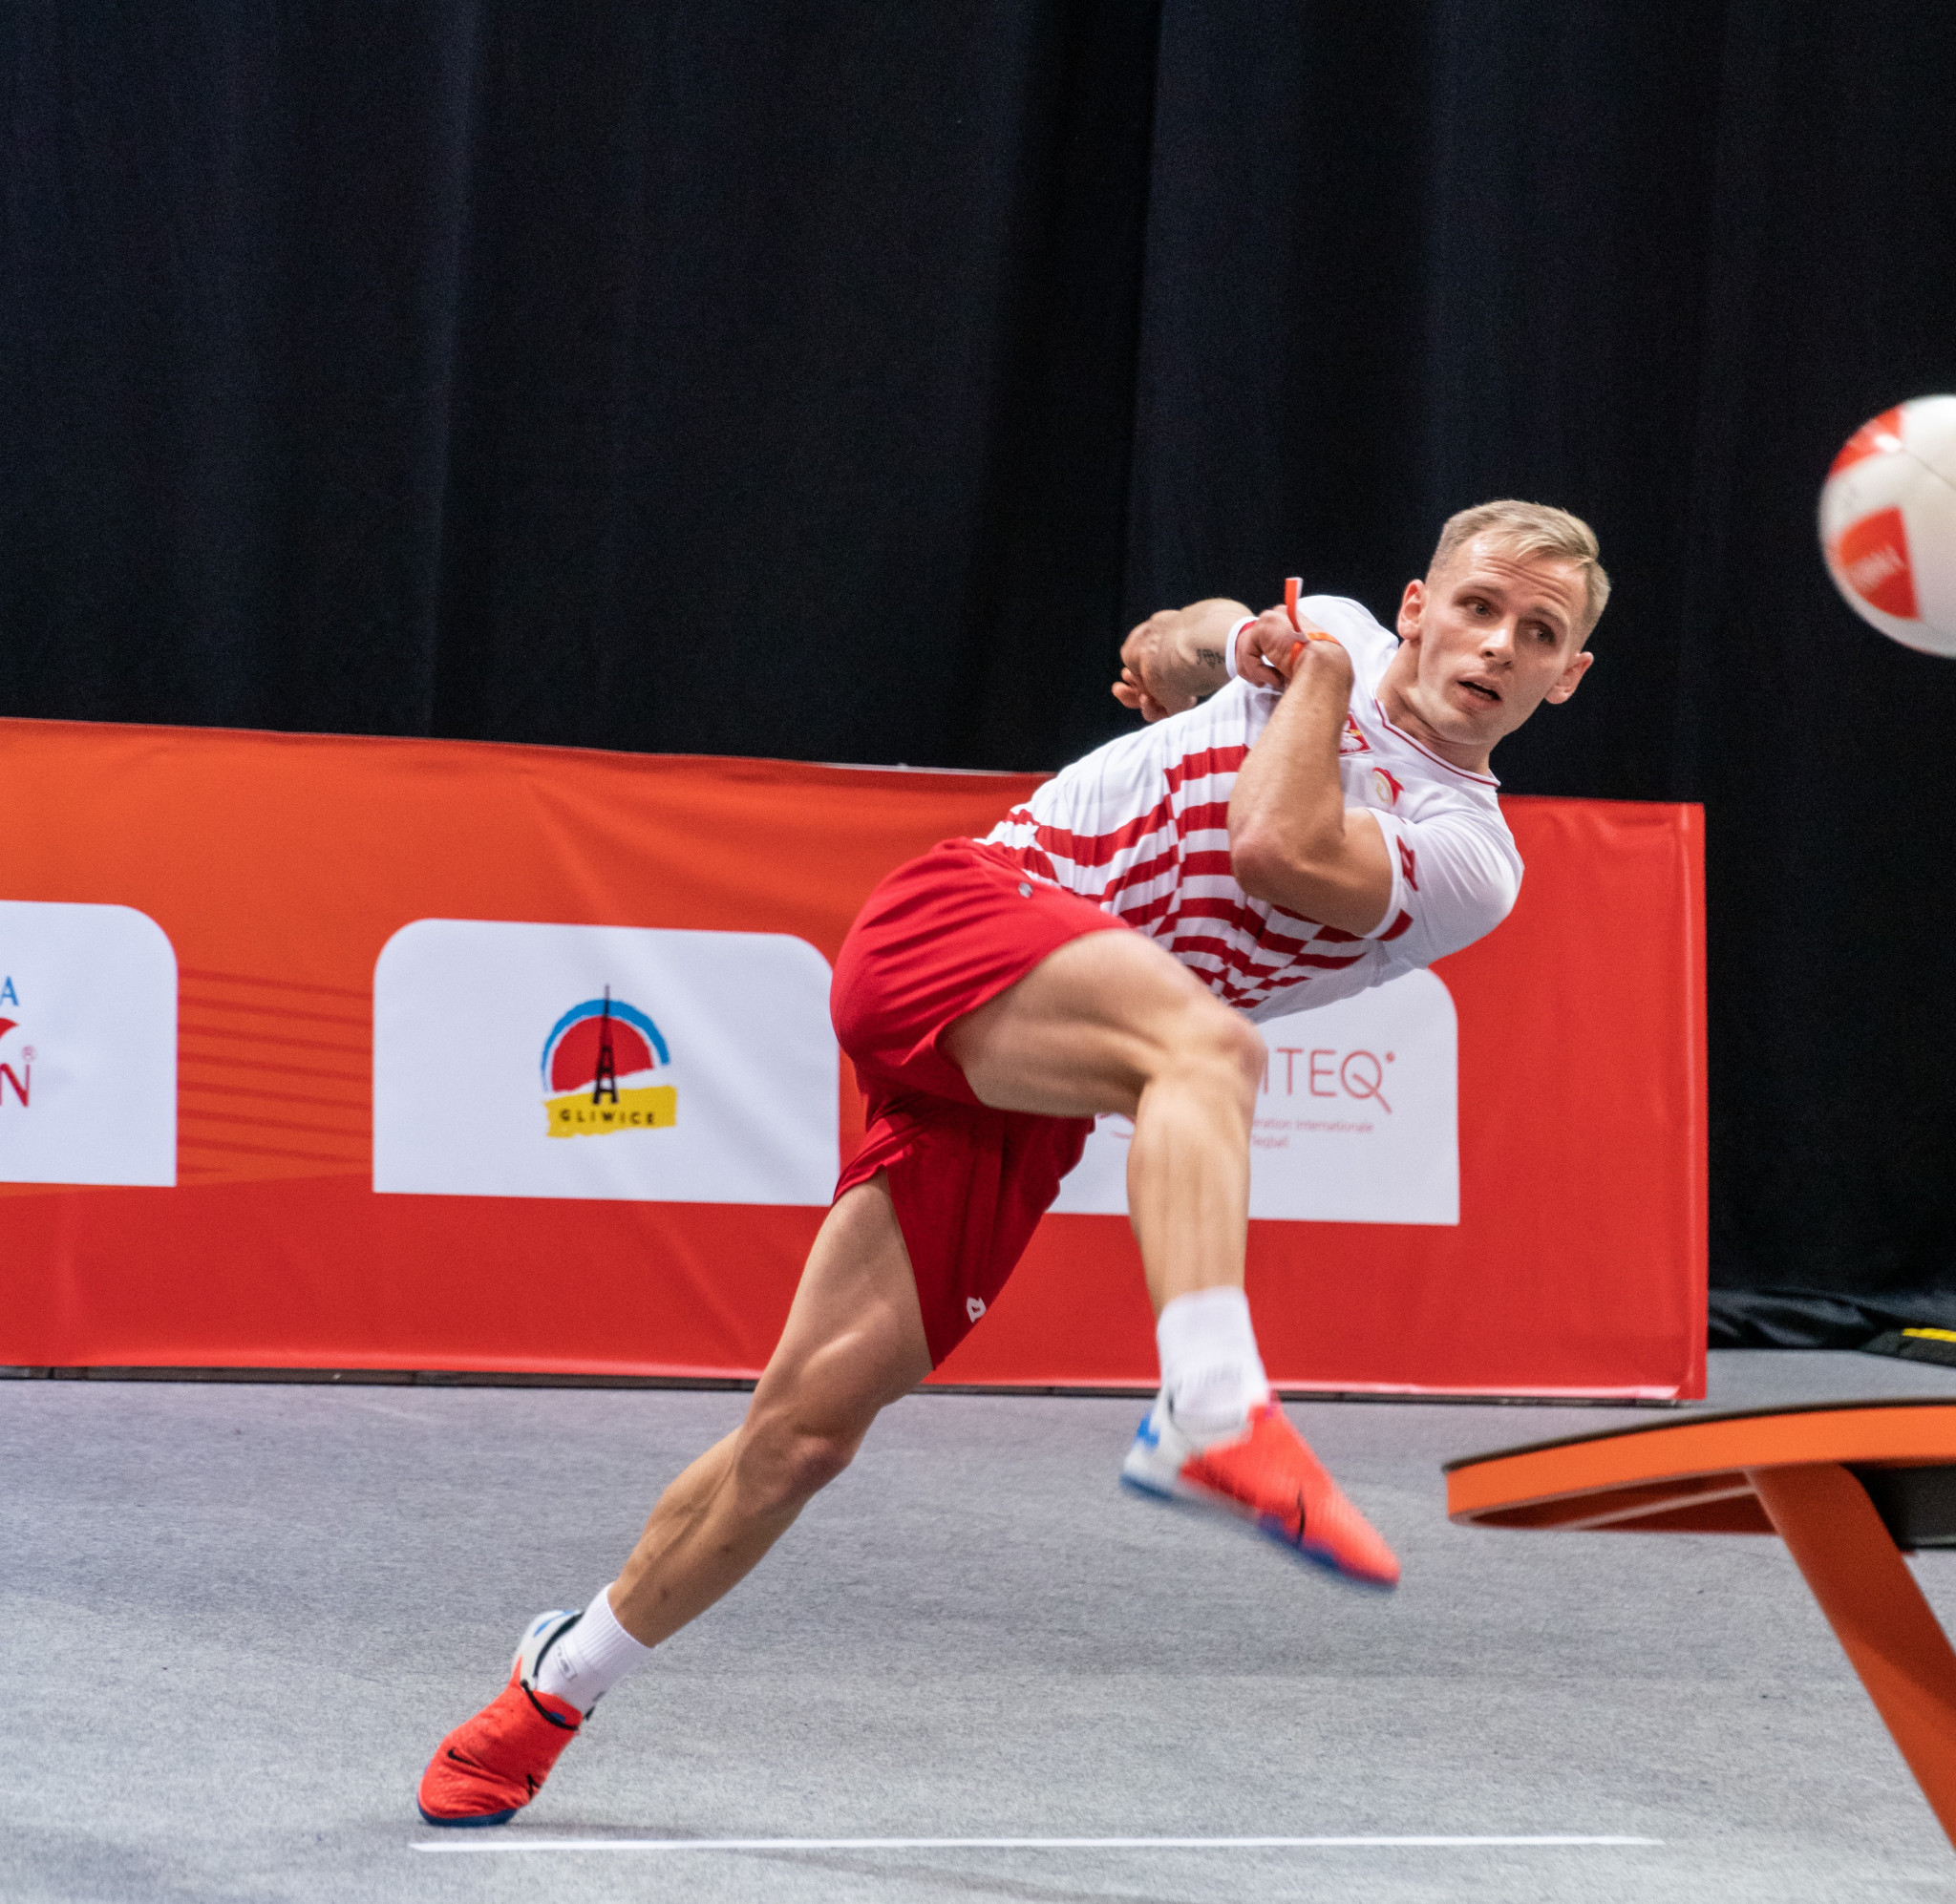 Poland is to host teqball at the 2023 European Games ©FITEQ